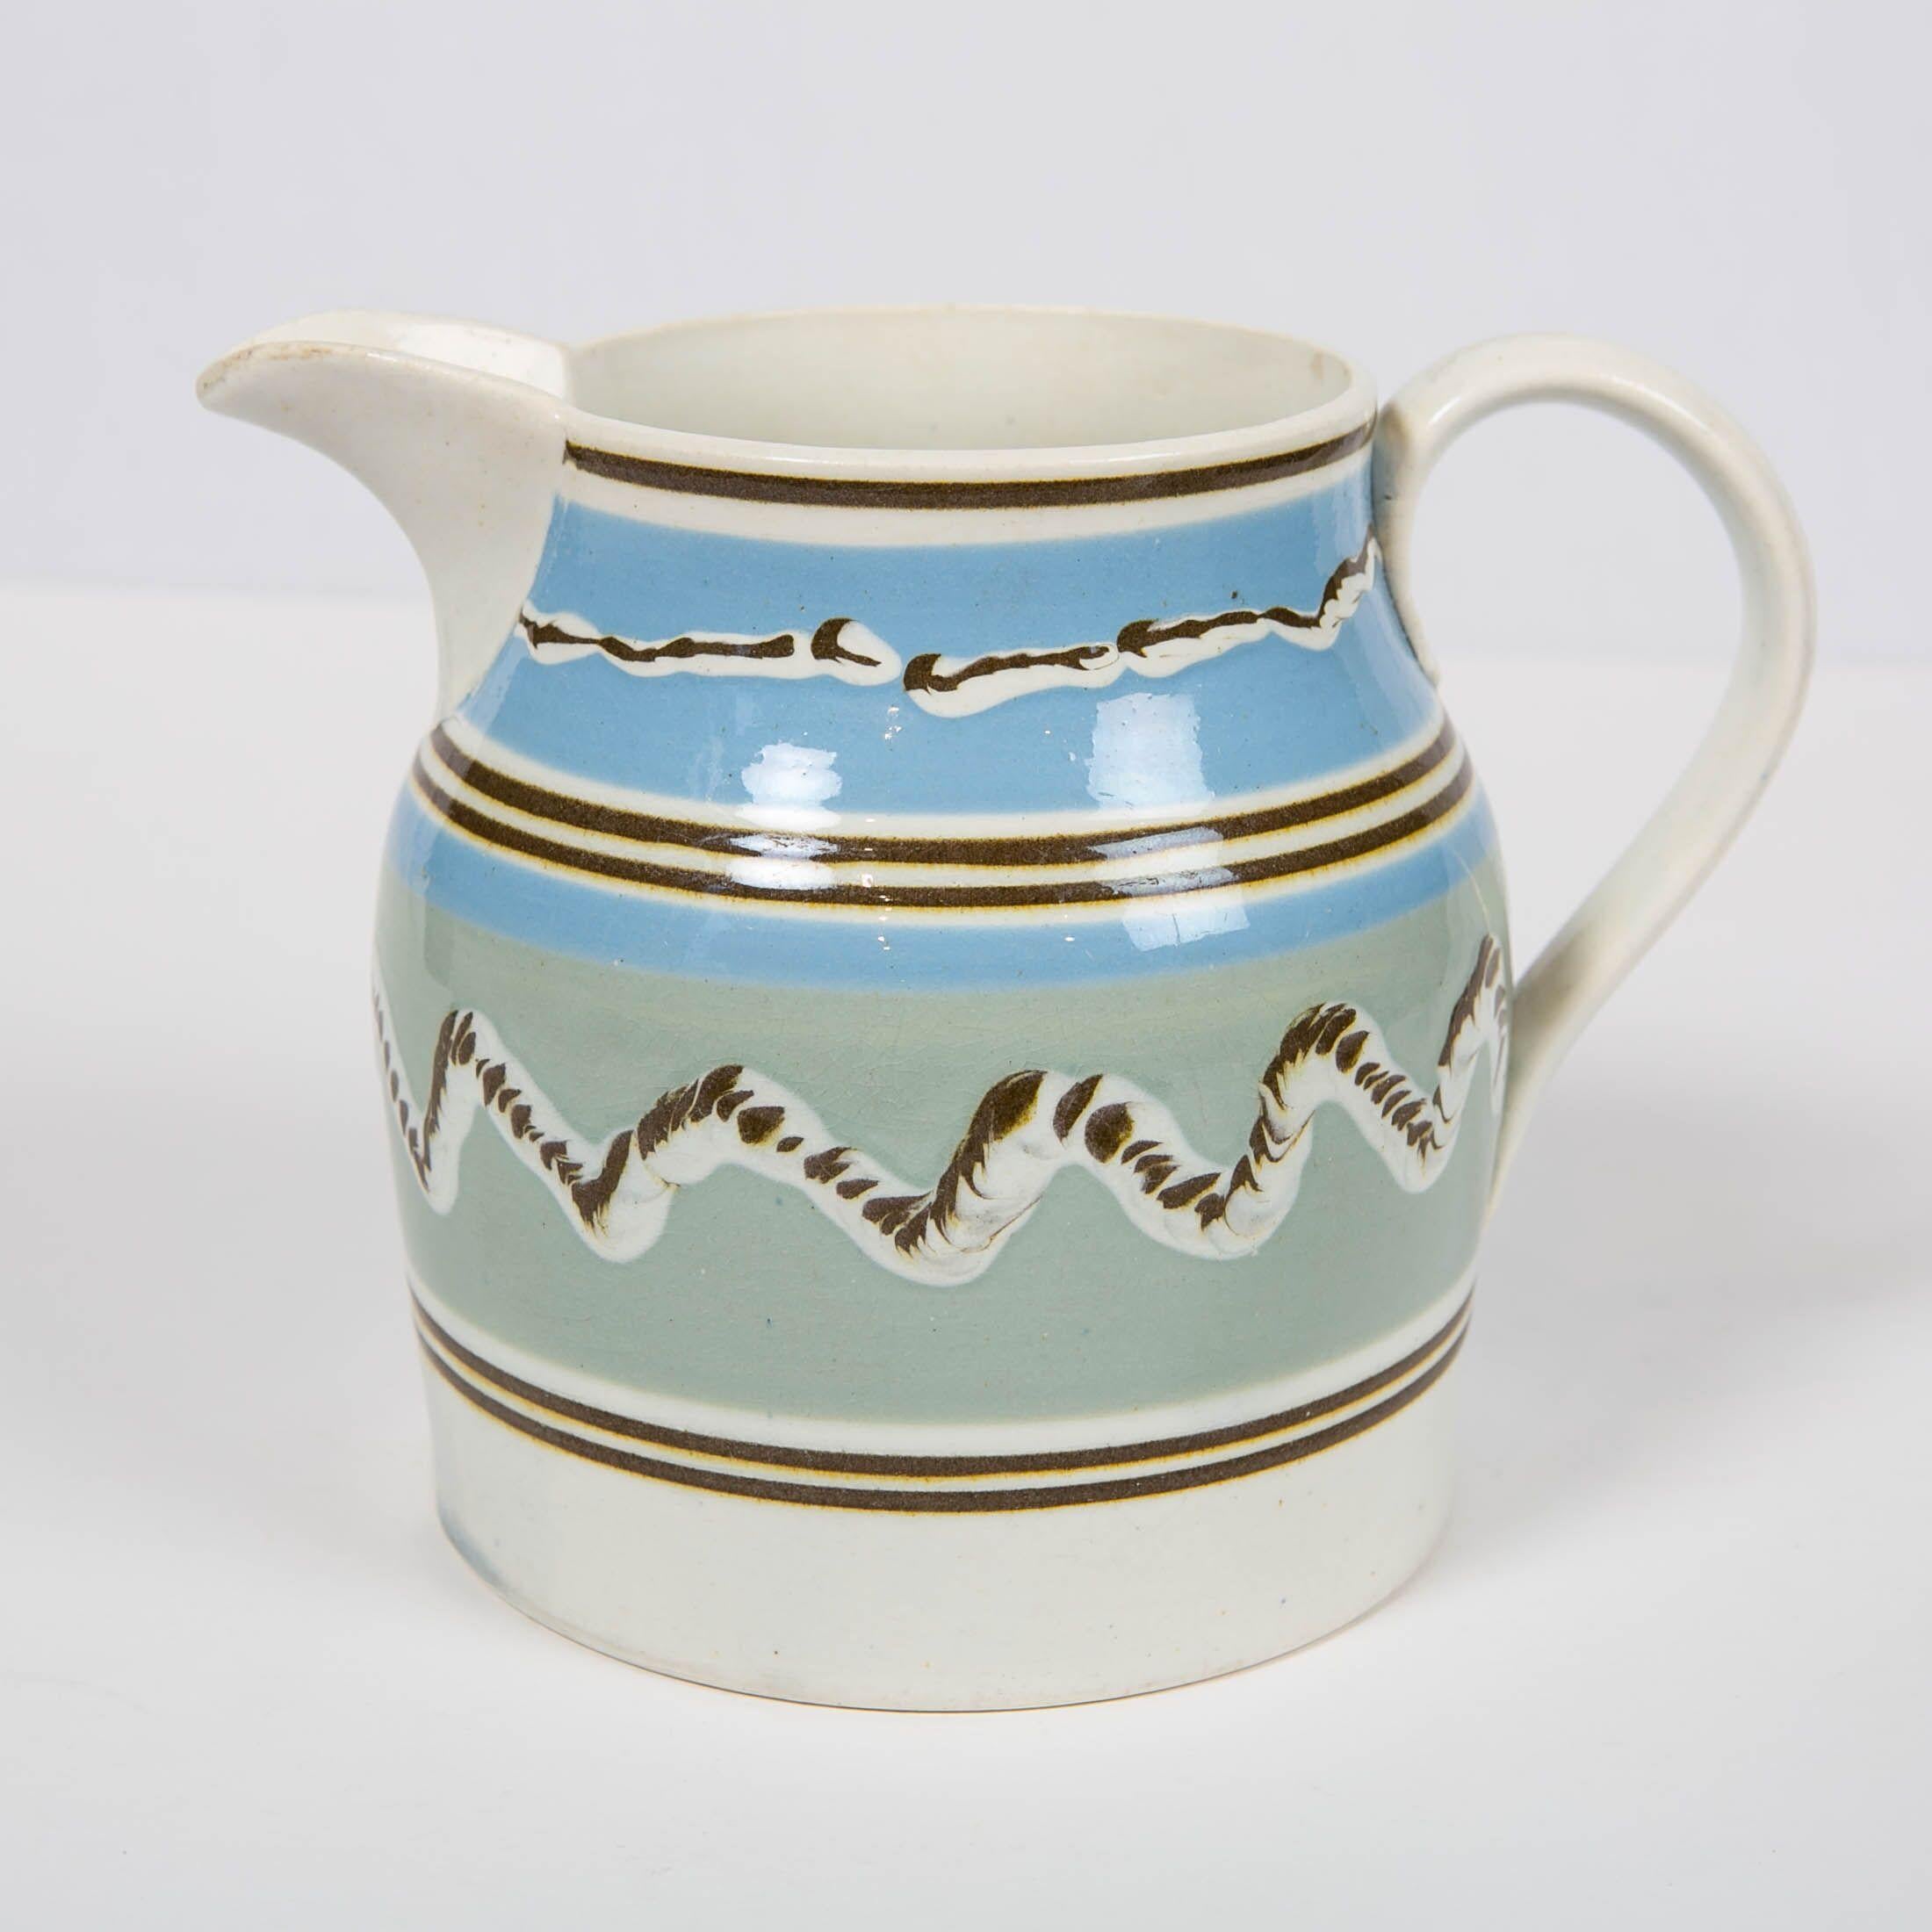 American Colonial Mochaware Pitcher Made of Pearl-Glazed Creamware in England, circa 1820